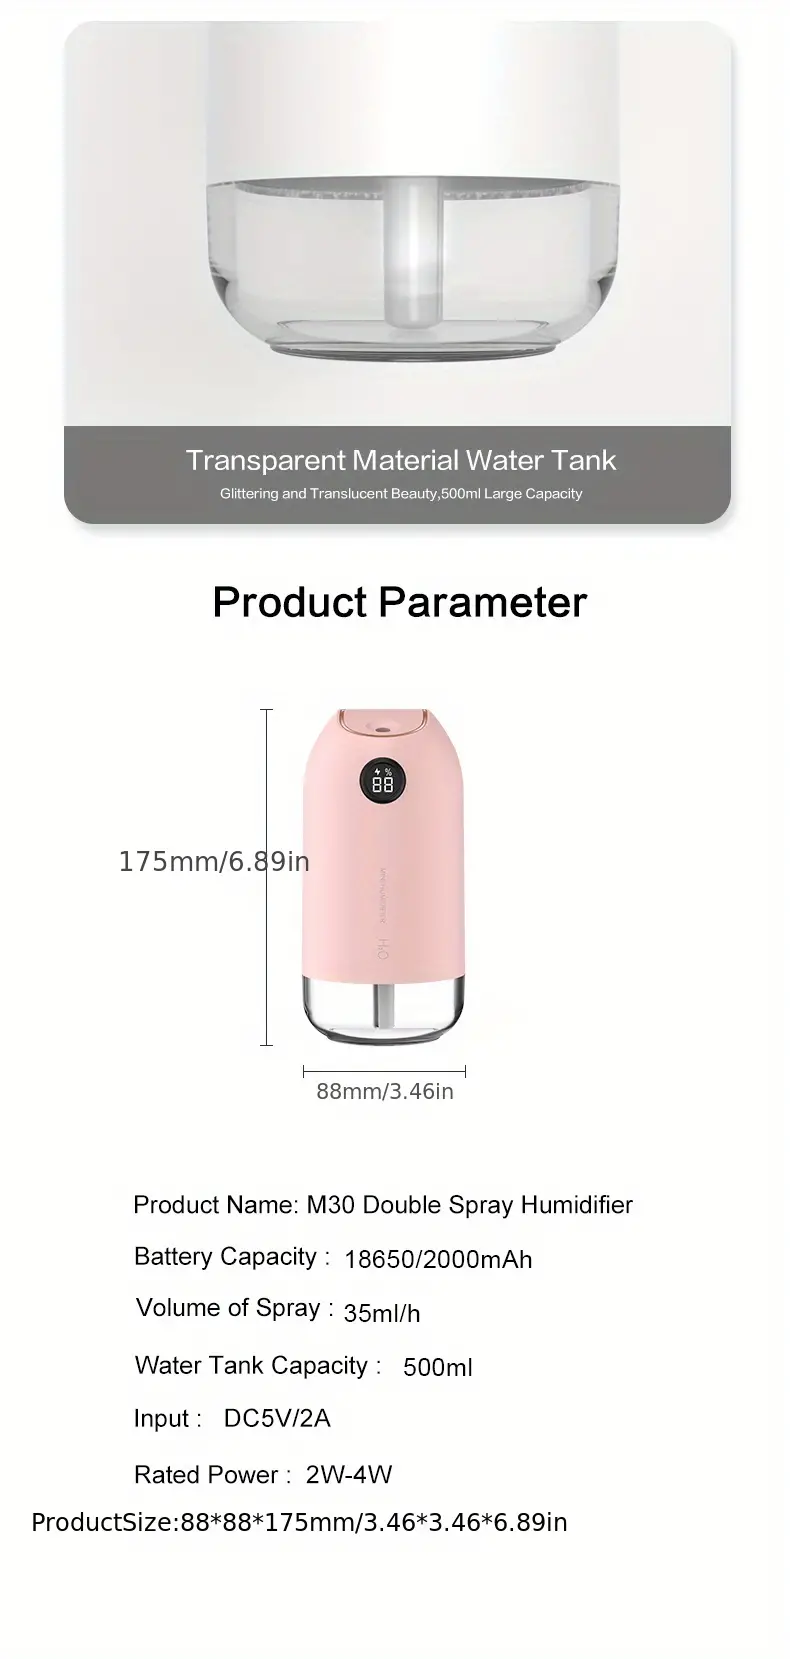 portable mini humidifier 500ml small humidifier type c personal desktop humidifier for baby bedroom travel office car household water shortage protection 2 spray modes super quiet night light white details 9